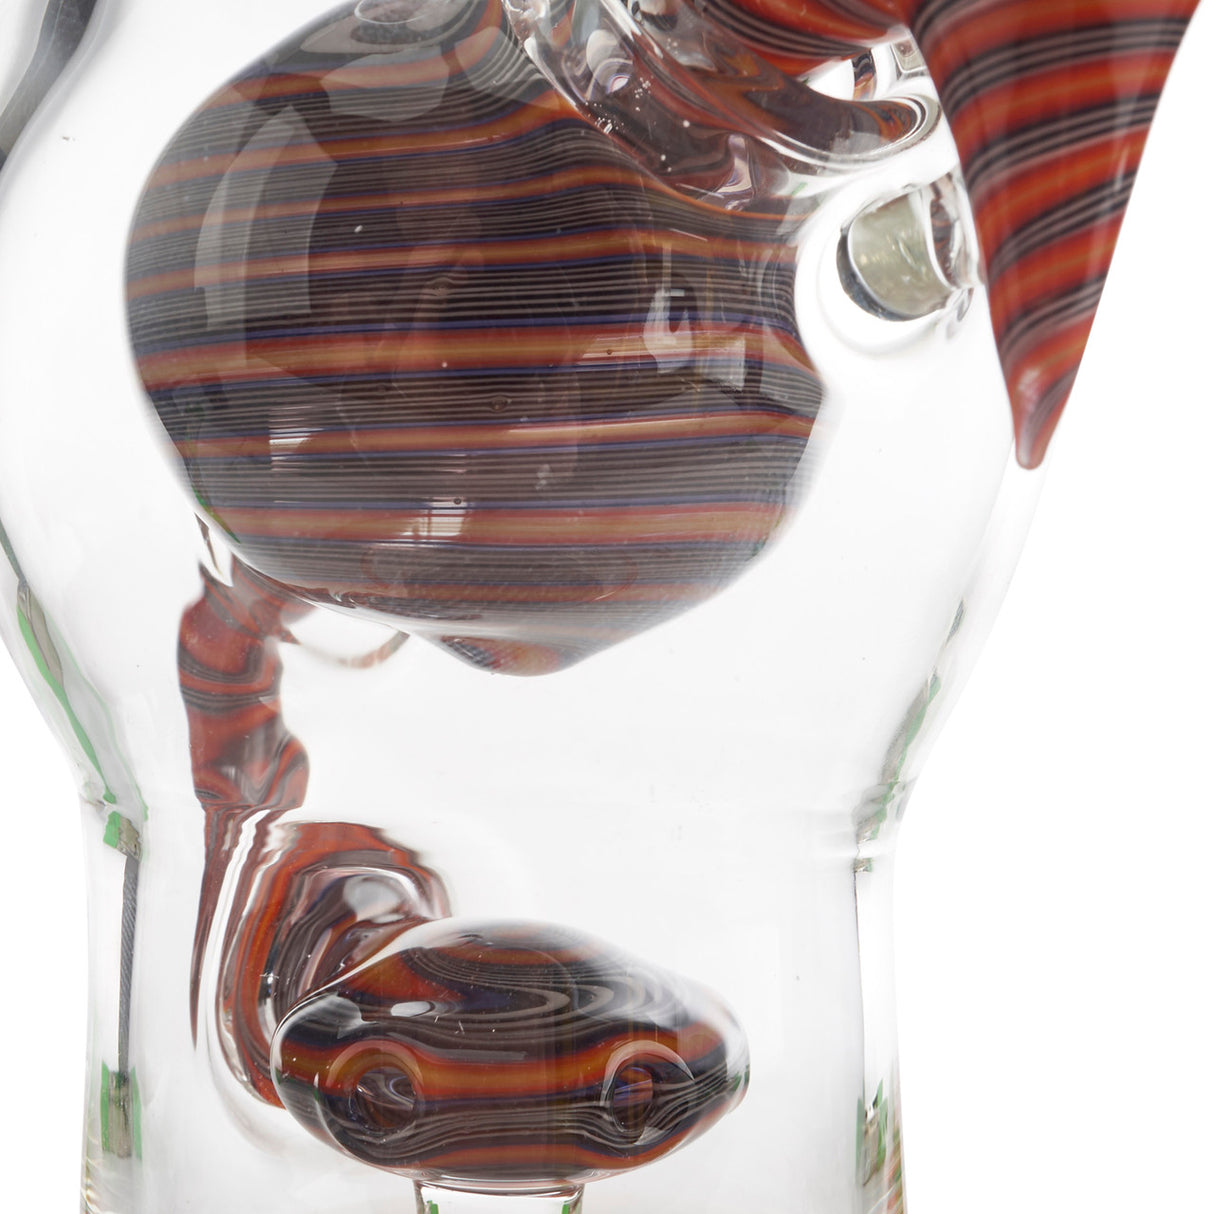 andy g glass ball rig orange and black linework online for oils